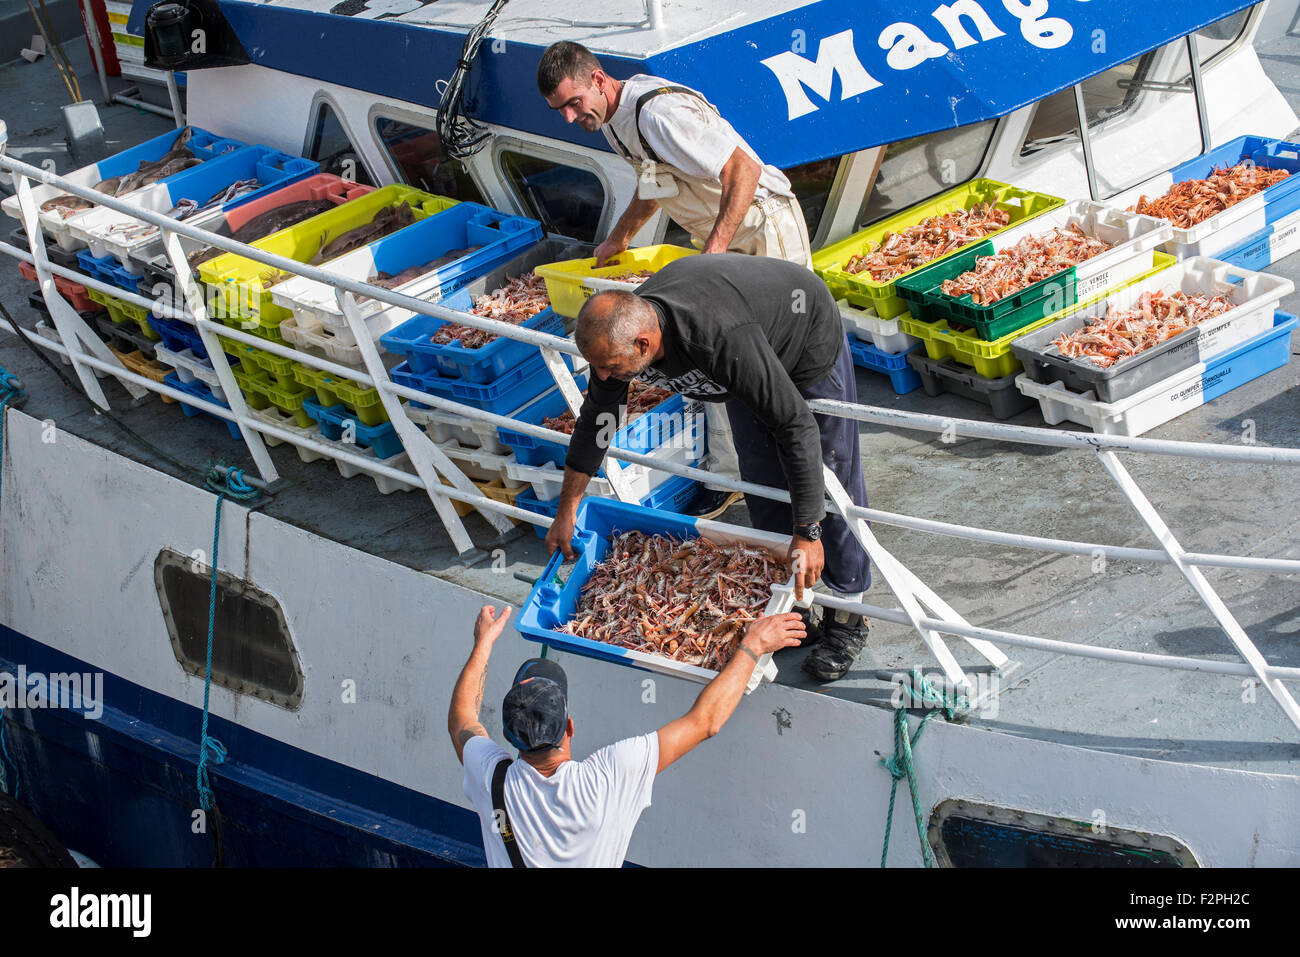 Fishermen on board of trawler fishing boat unloading catch along quay of the fish auction market, Brittany, France Stock Photo